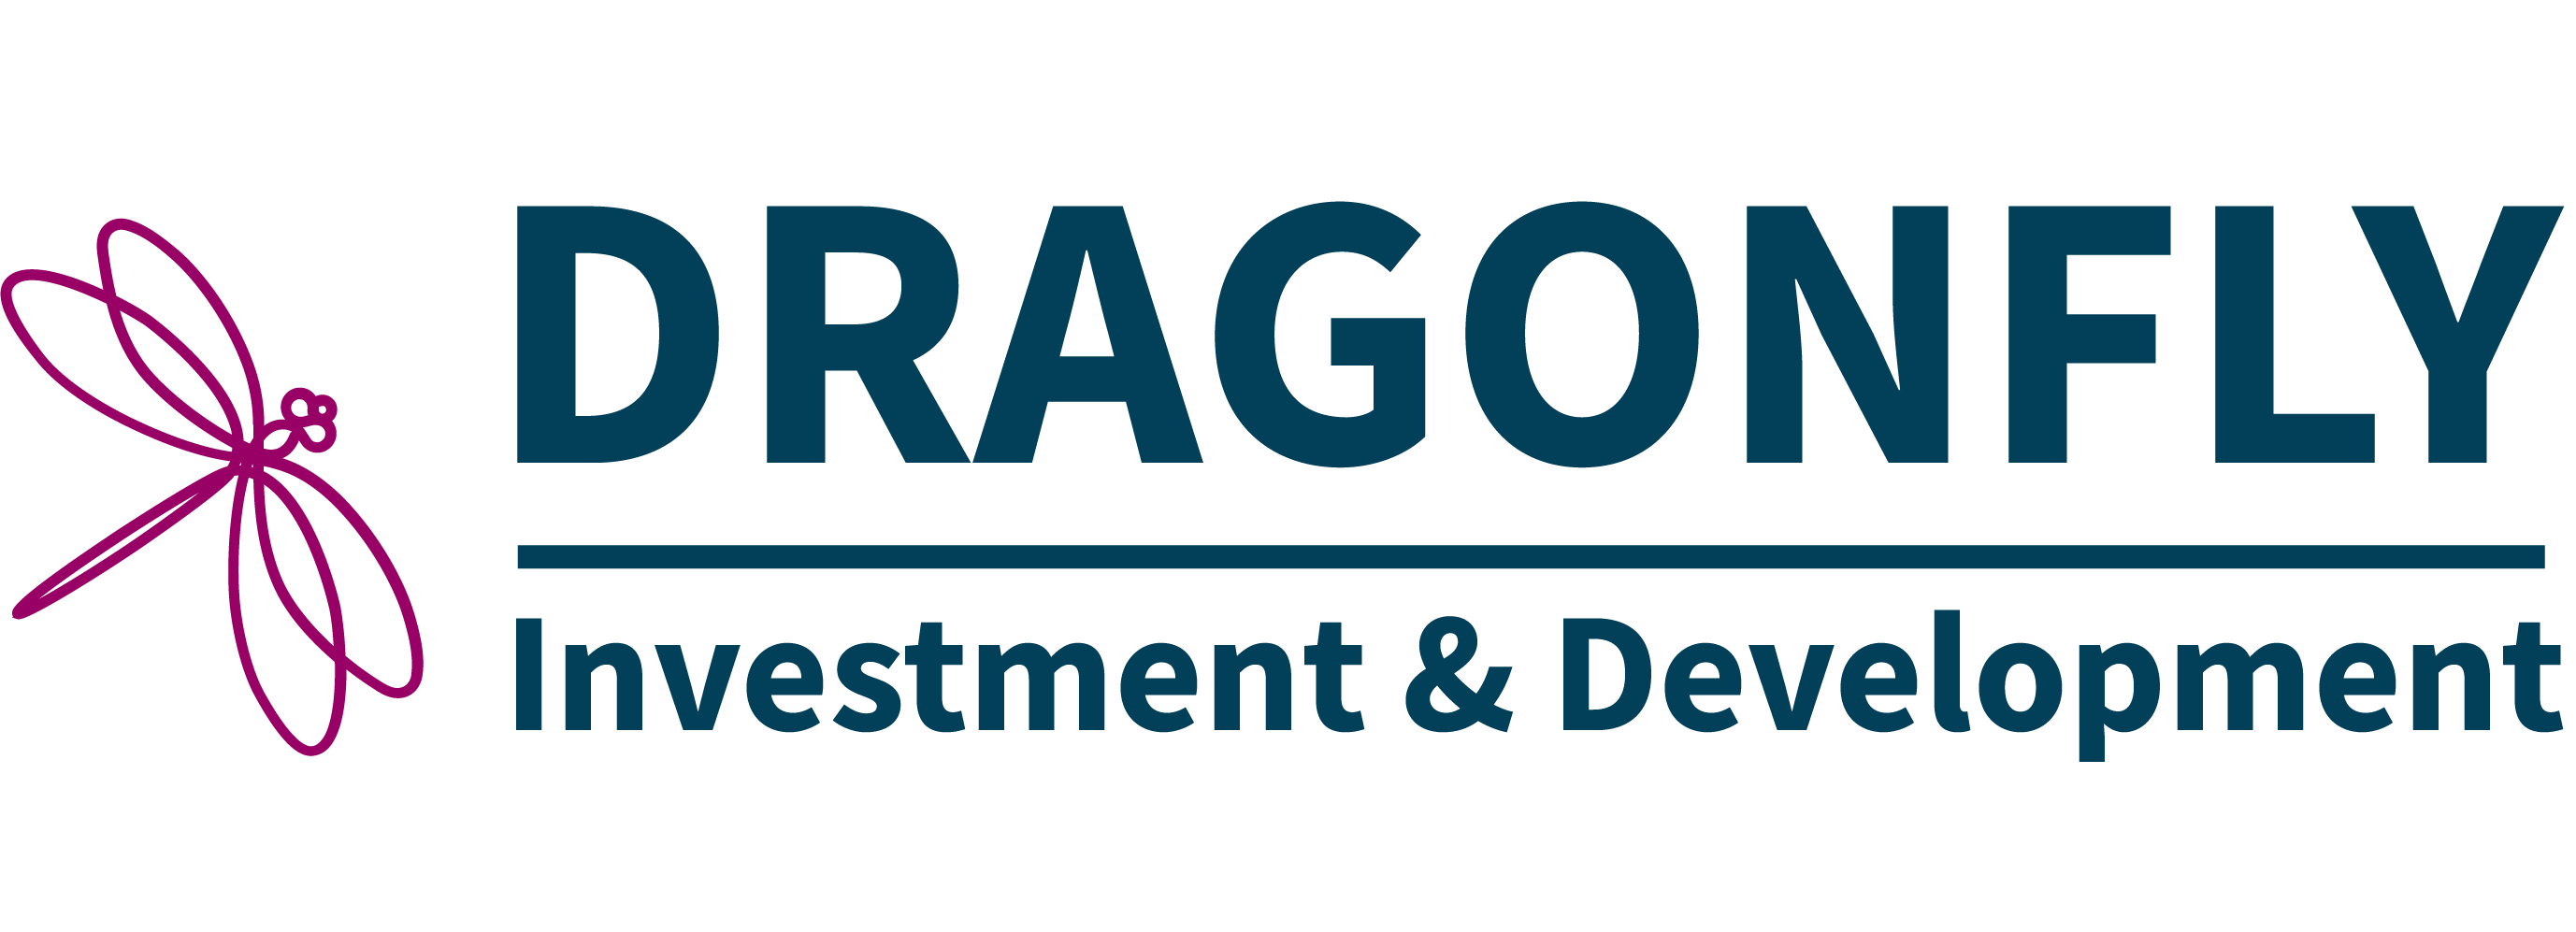 Dragonfly Investment and Development logo